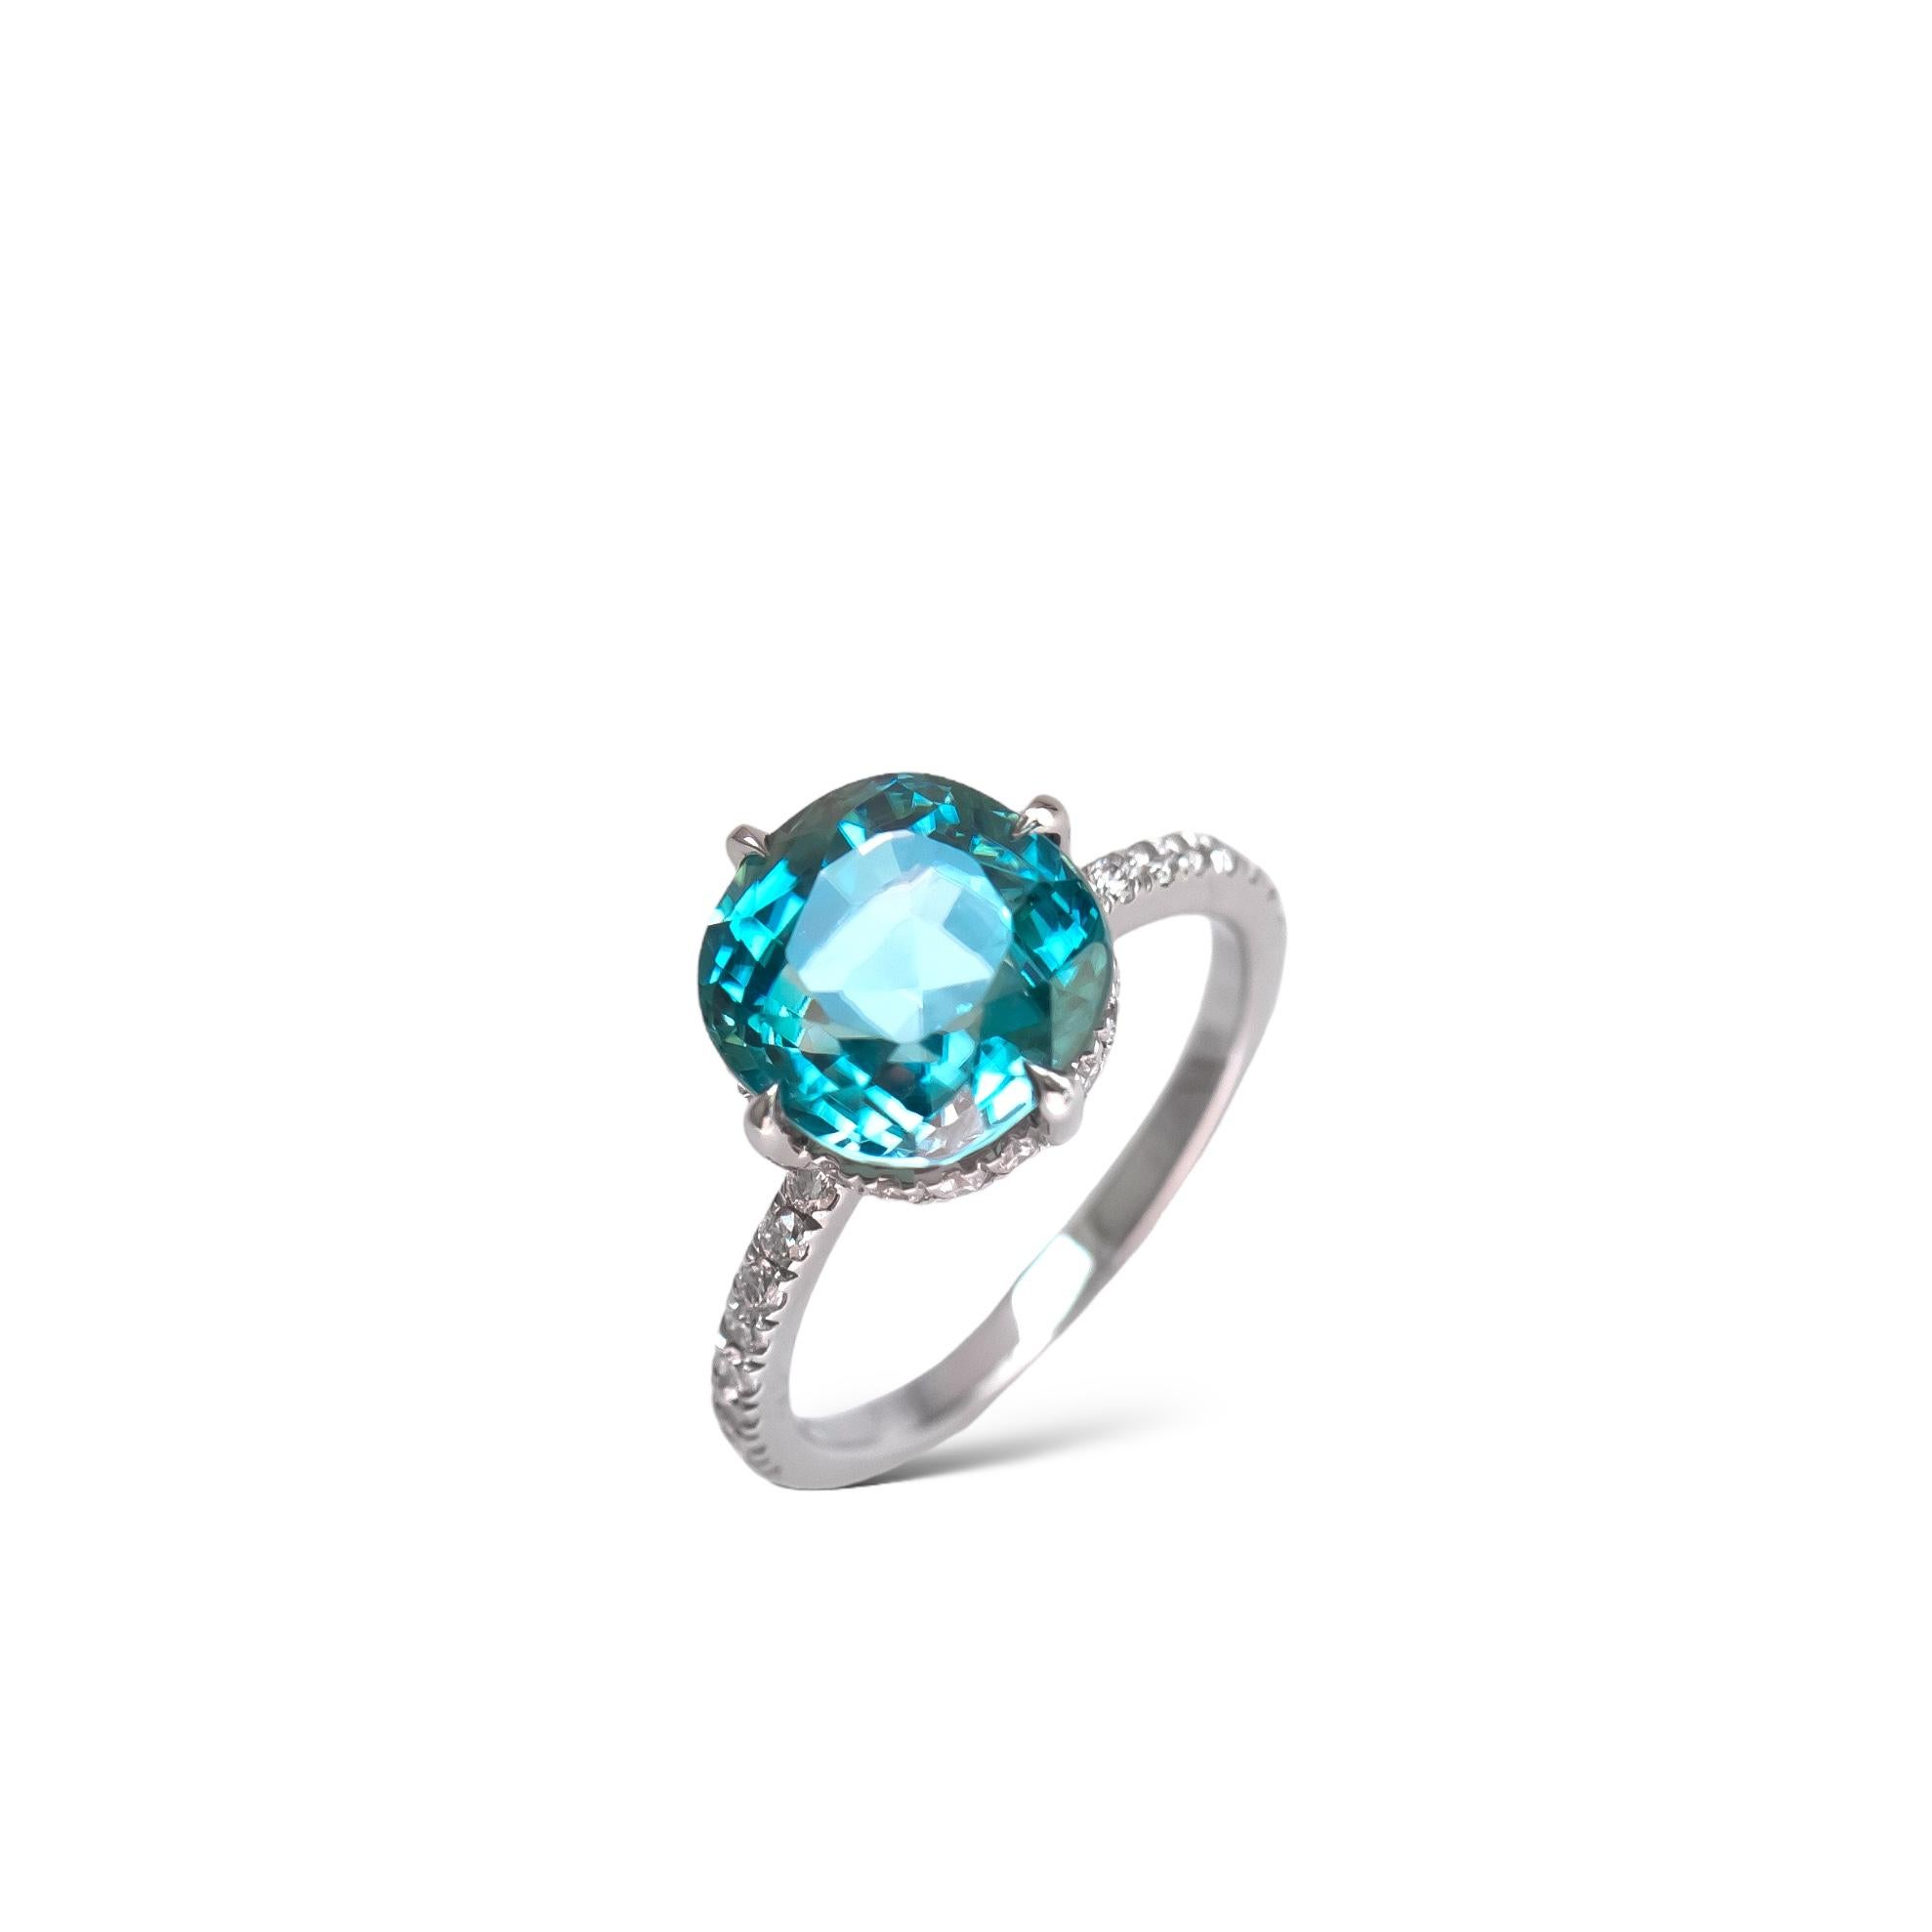 Beautiful natural blue zircon and diamond cocktail ring in platinum.

The zircon is an antique cushion cut with beautiful faceting pattern and will be set in an east-west setting. The zircon weight is 7.20 carat, and it measures 10.36mm x 9.91mm.